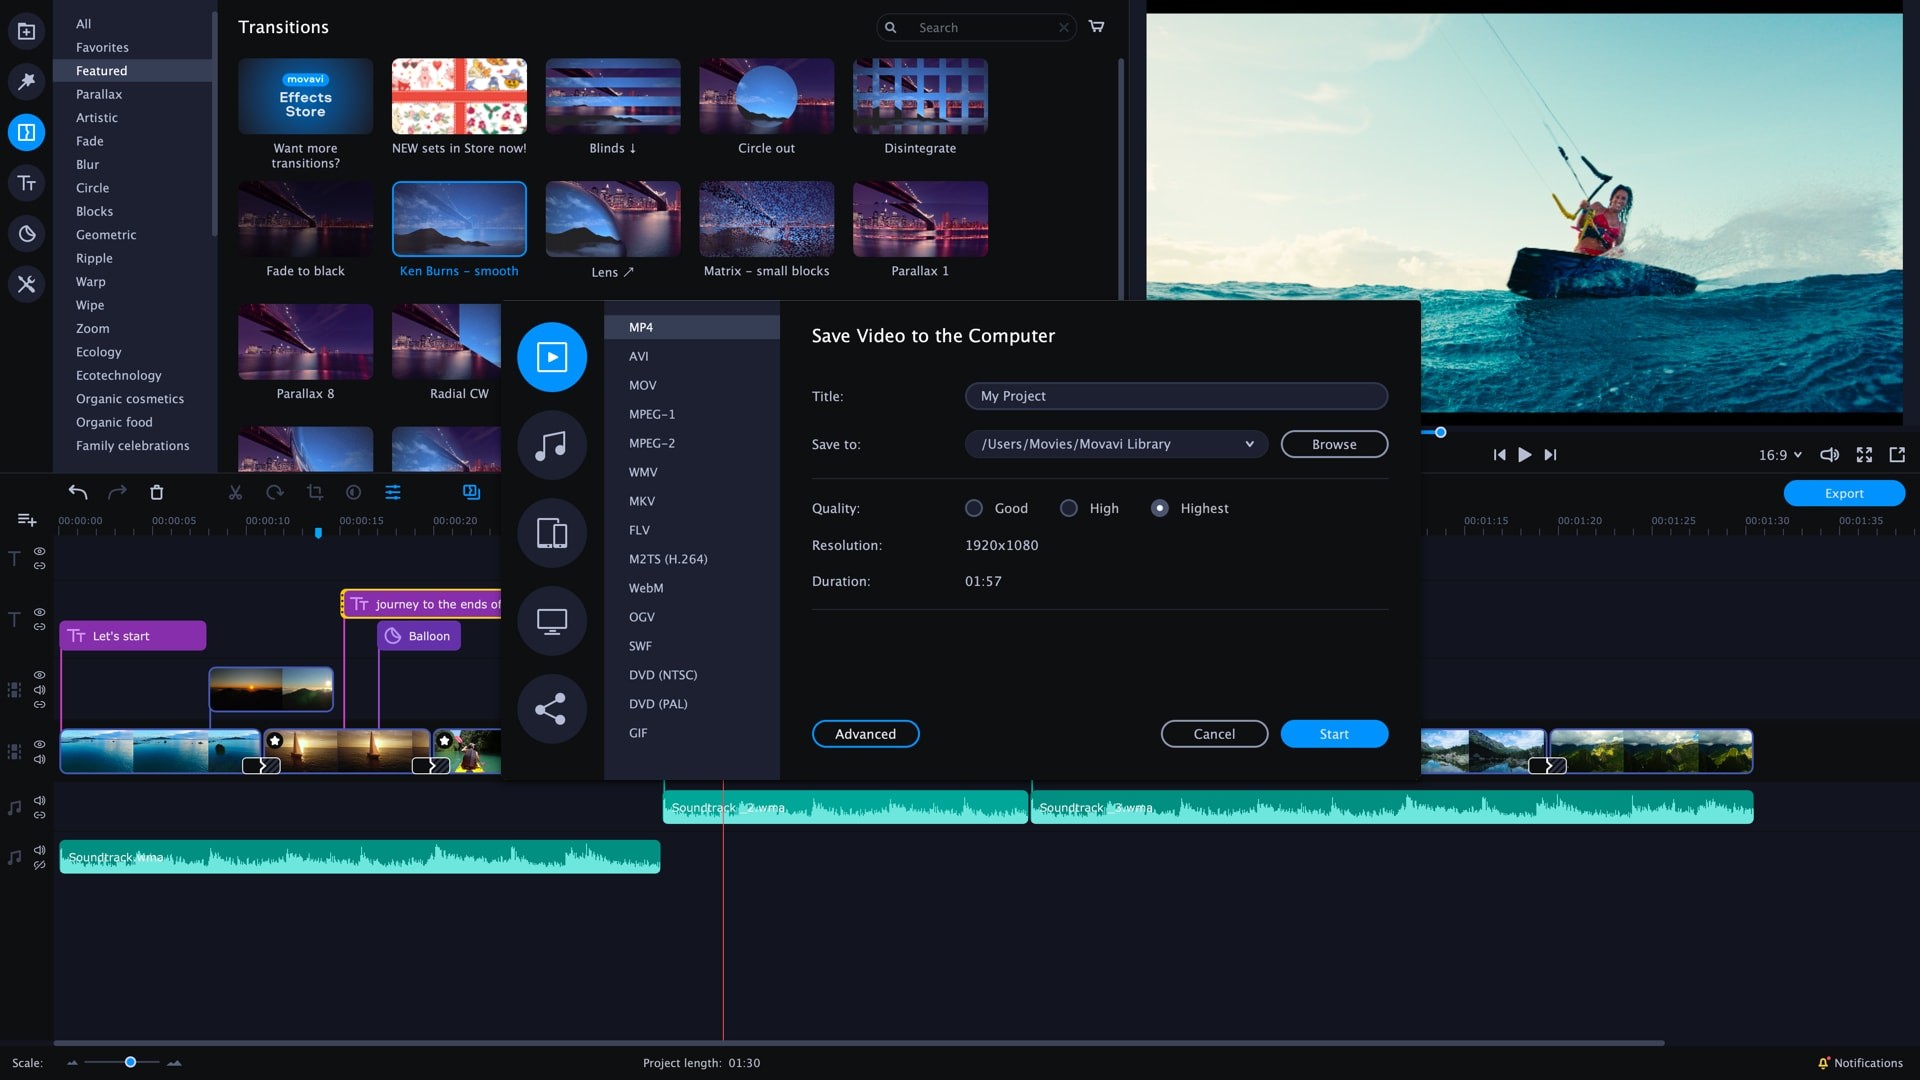 movavi video suite 2020 review